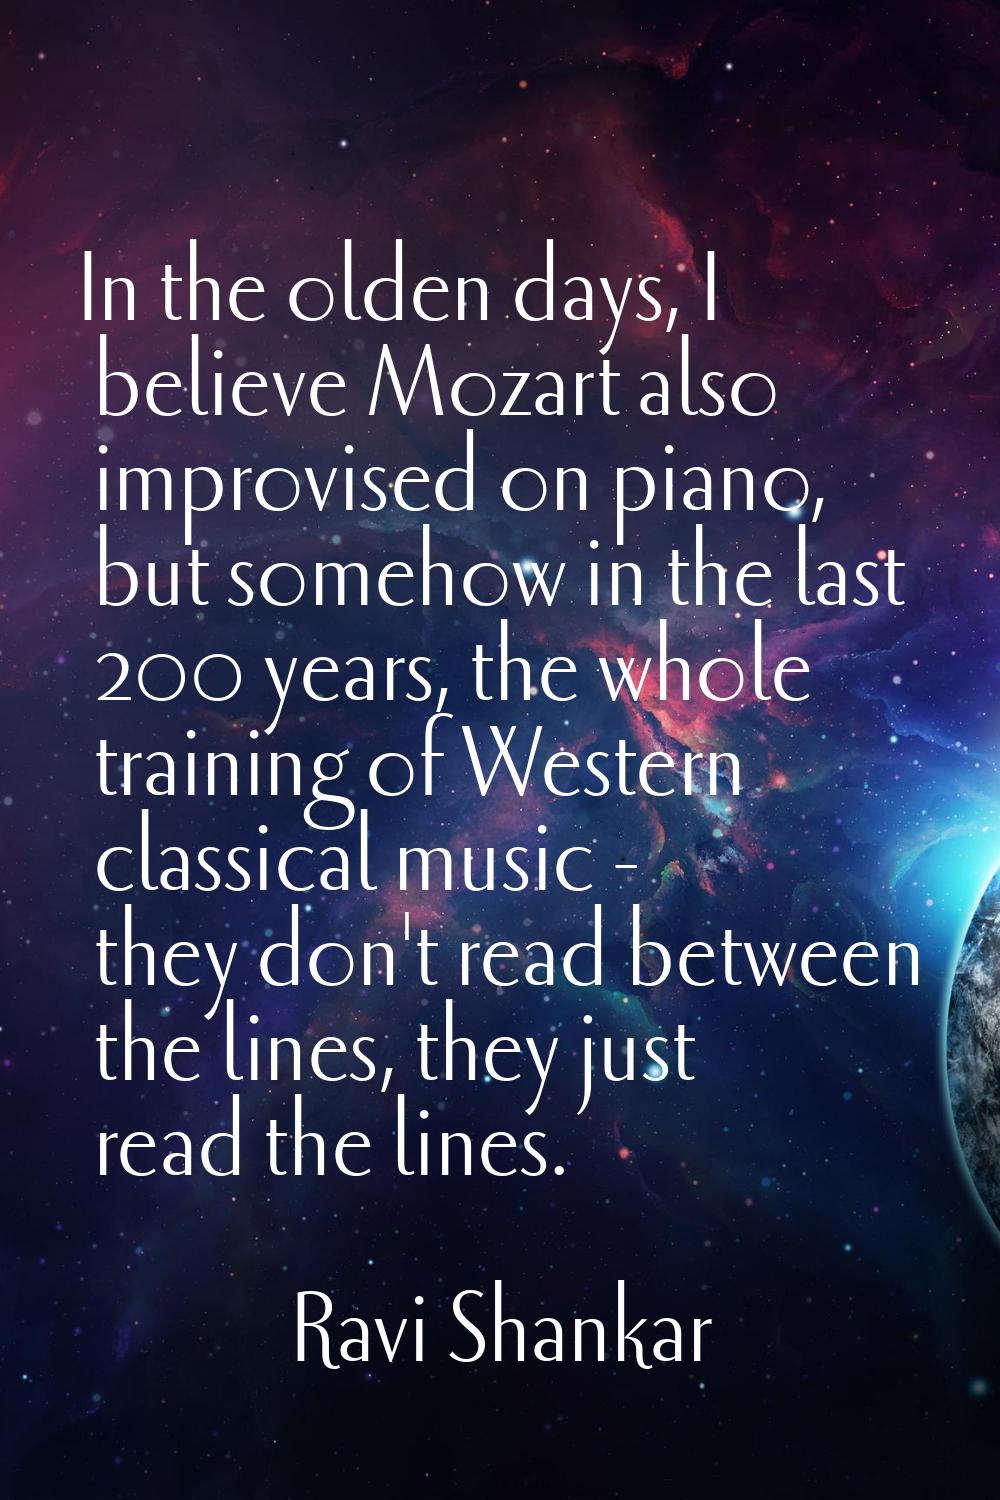 In the olden days, I believe Mozart also improvised on piano, but somehow in the last 200 years, th